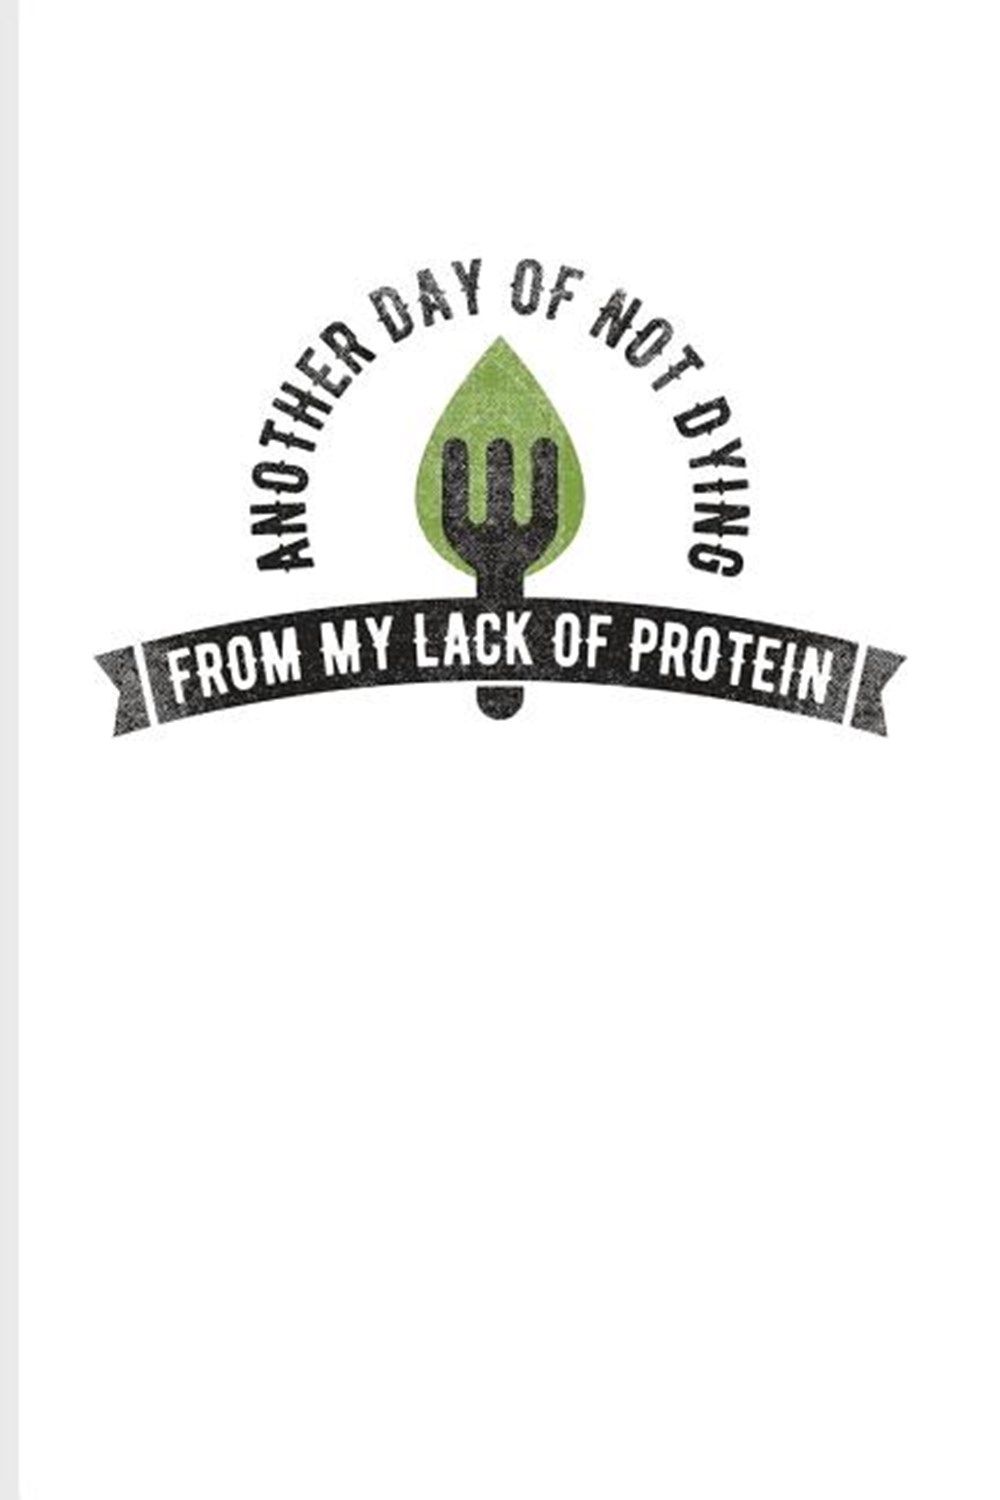 Another Day Of Not Dying From My Lack Of Protein Cool Green Leaf Logo Journal For Diet Plan, Recipe,